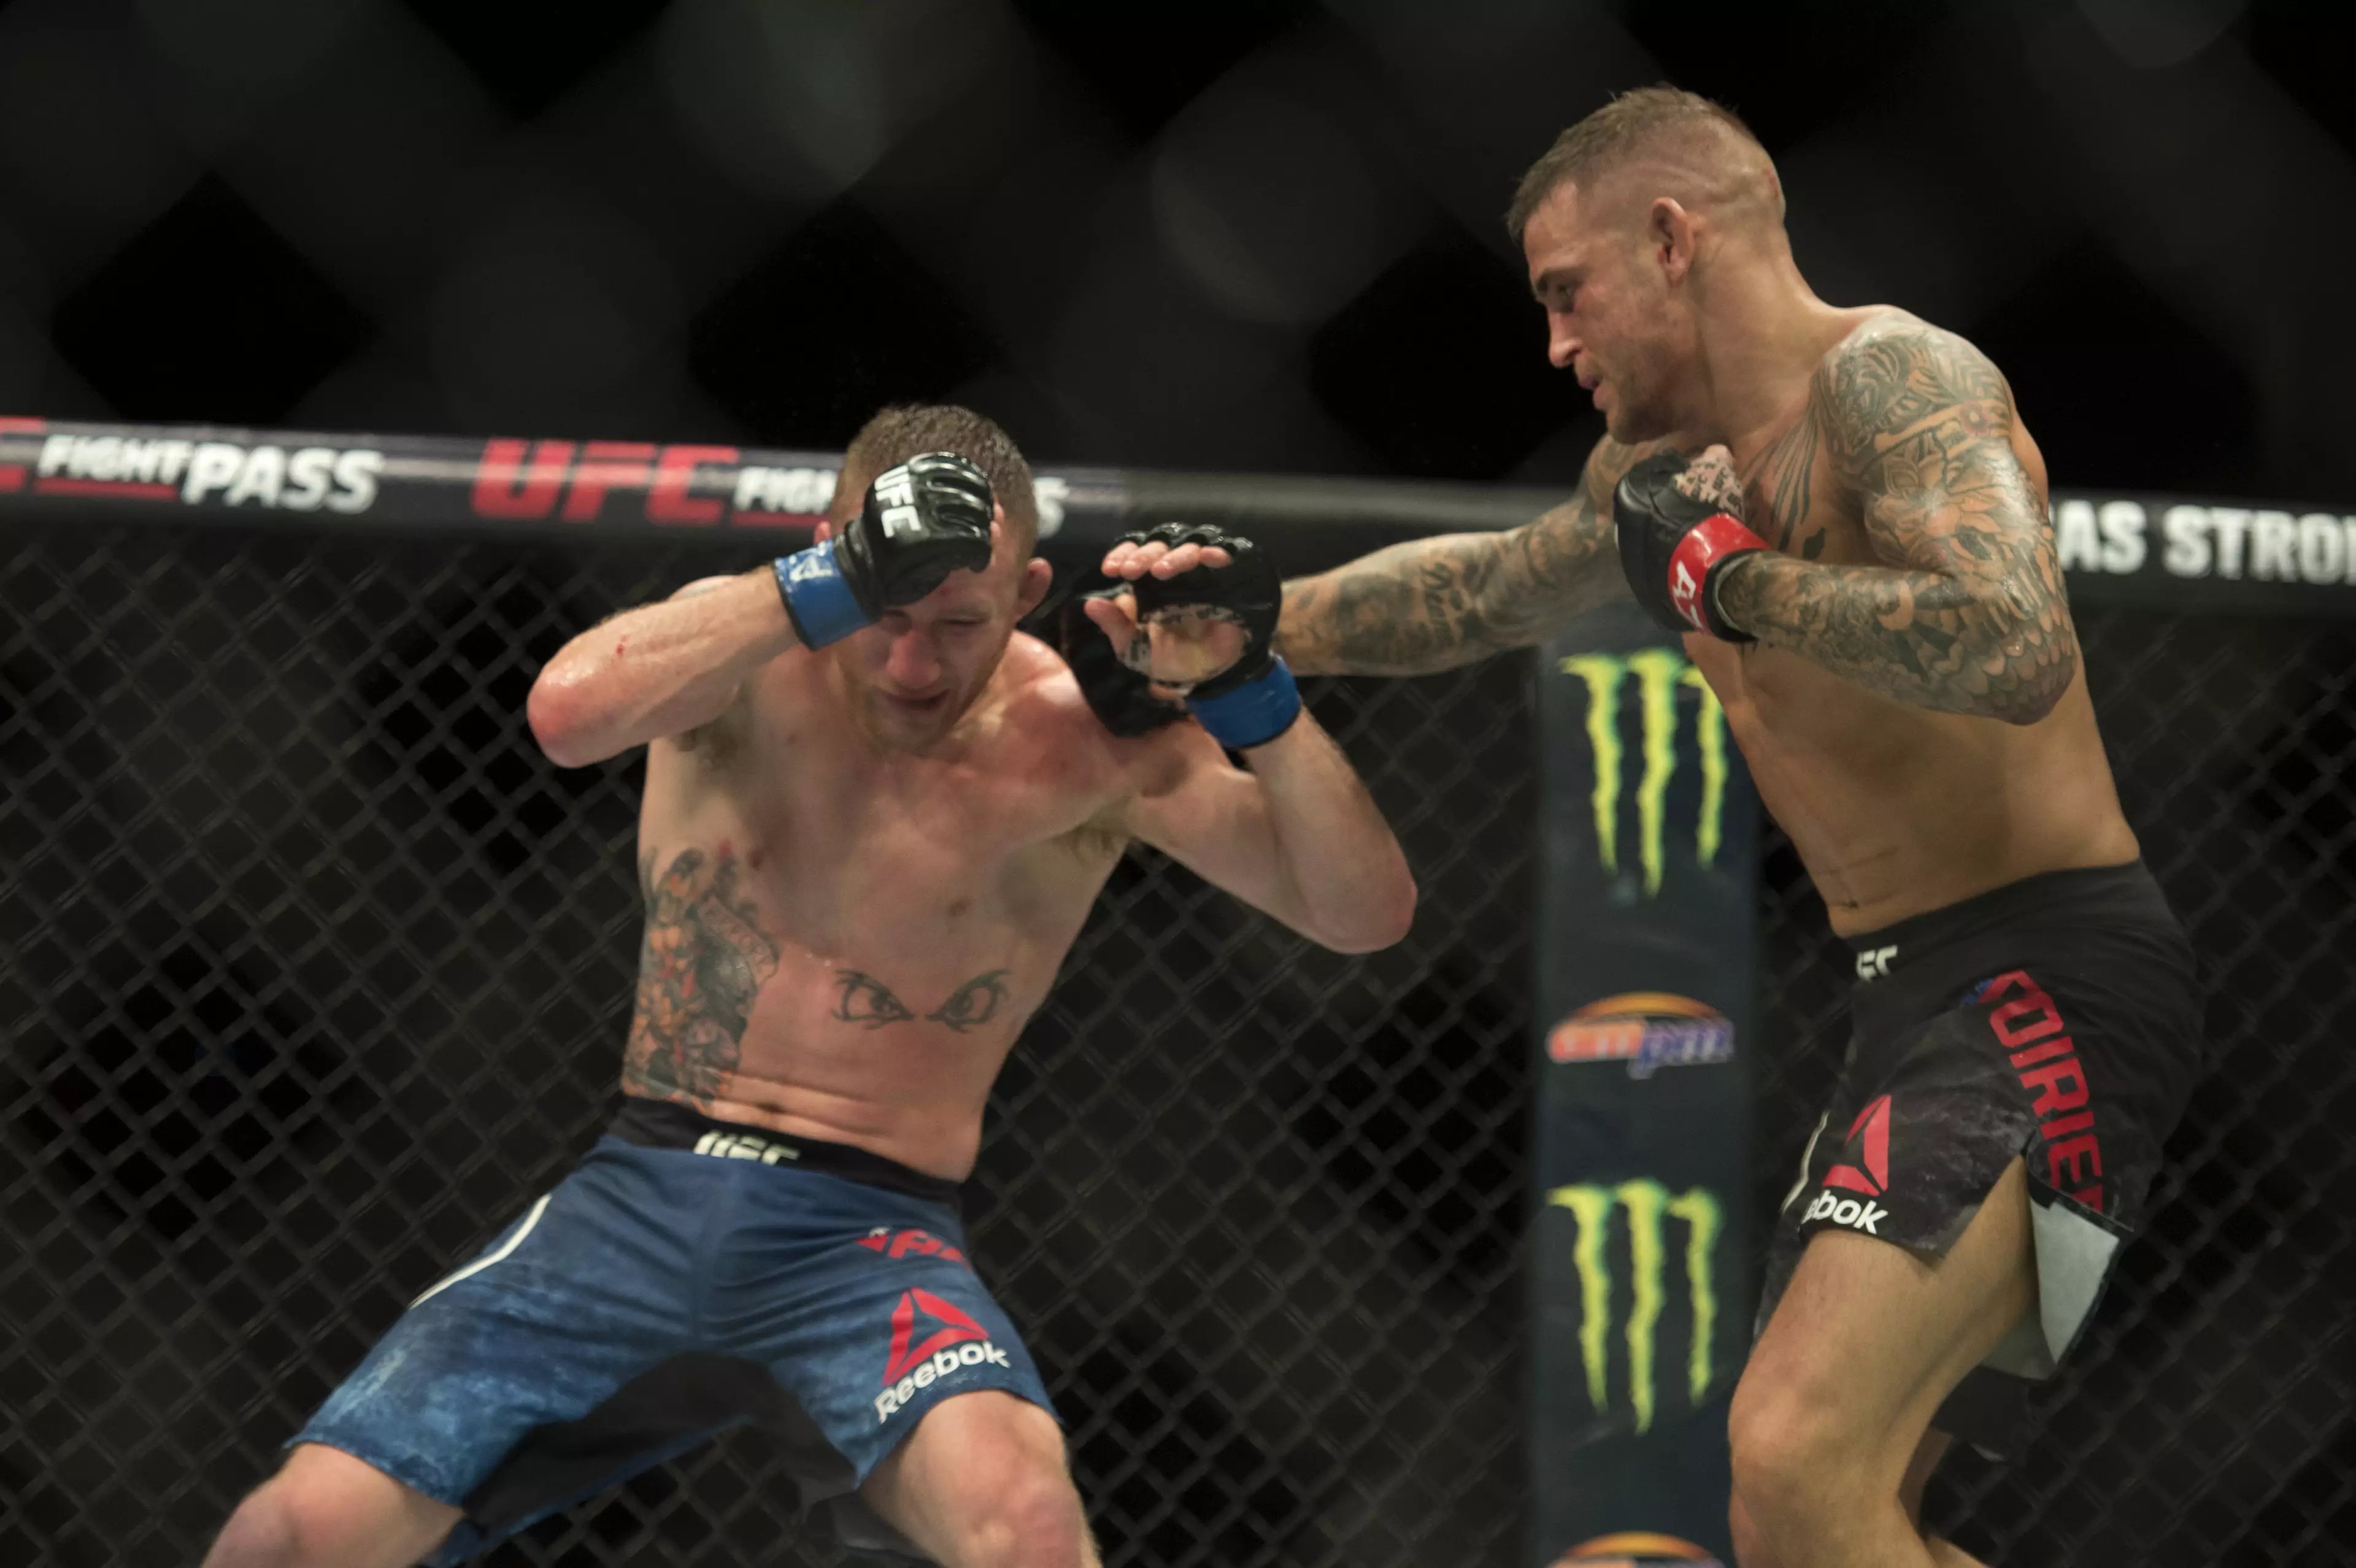 Poirier could be McGregor's next opponent. Image: PA Images